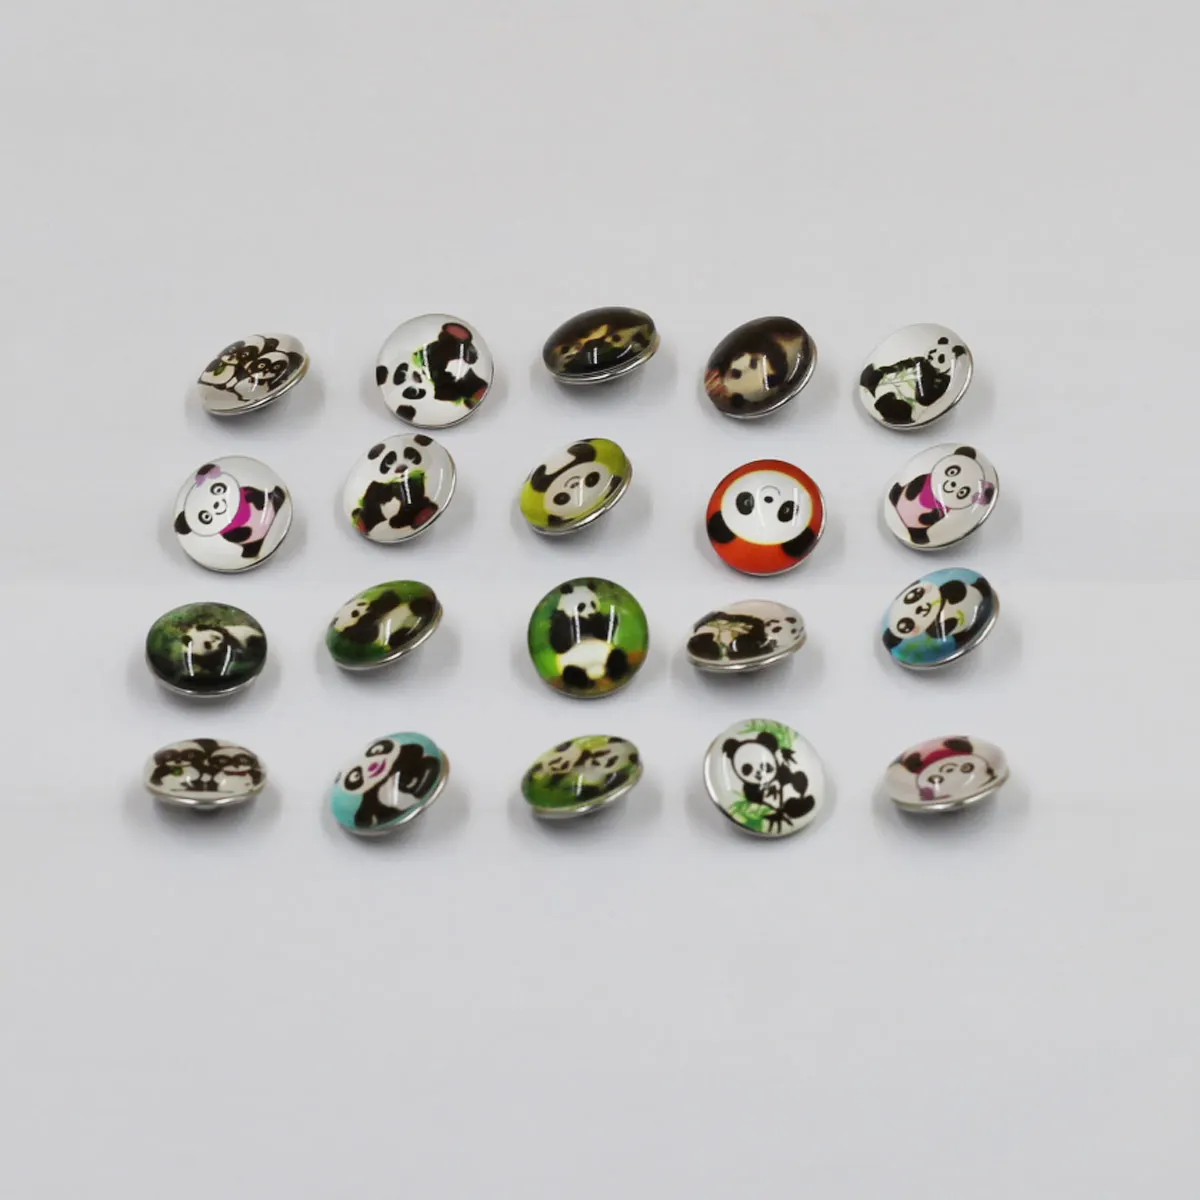 

10PCS Mixed Round Snap Buttons 18mm Cartoon Panda Pattern DIY Snap Jewelry Making Accessories Festival Gift Handmade Materials